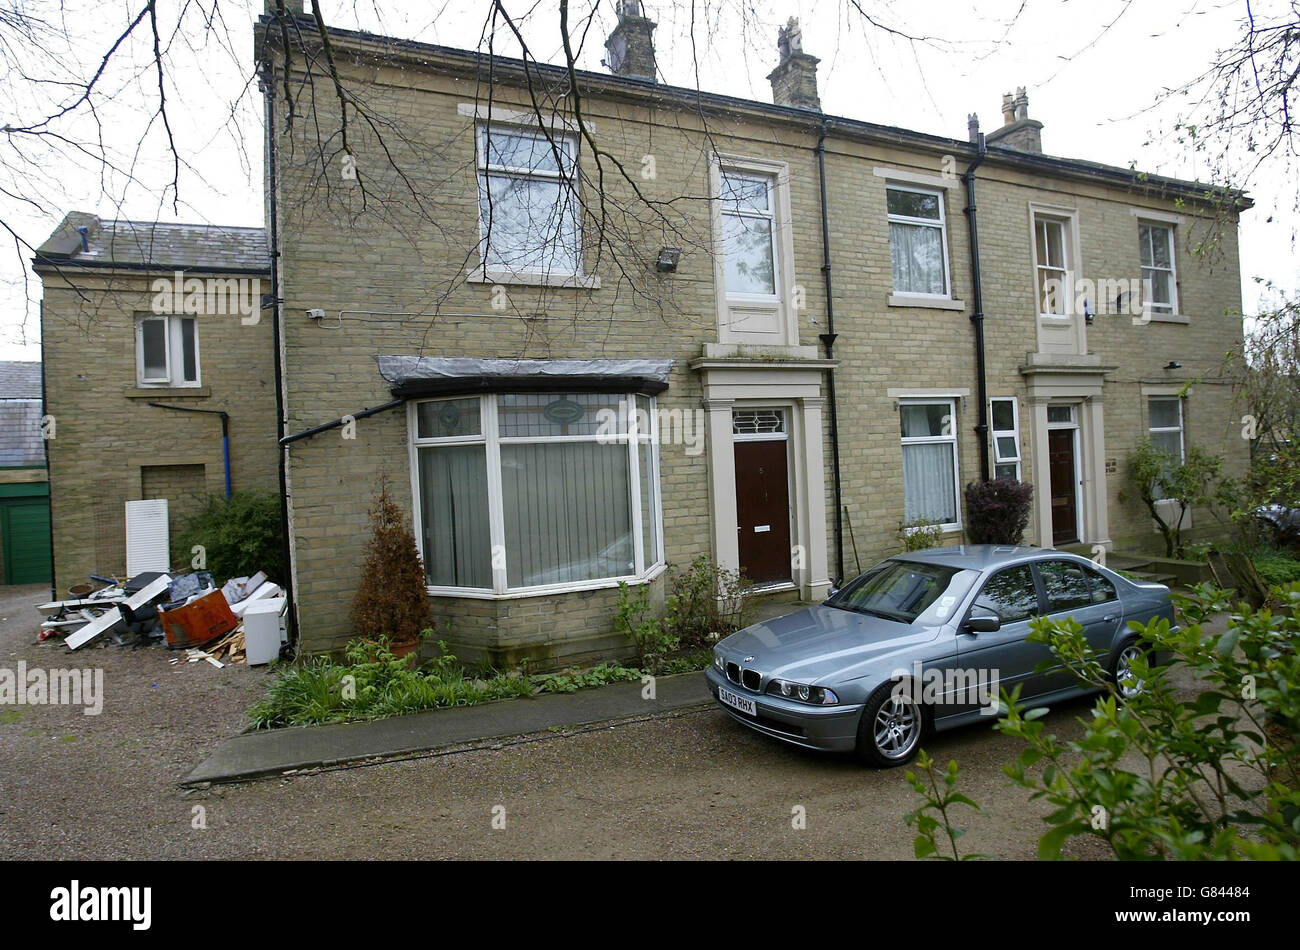 The six-bedroom home of Conservative councillor Jamshed Khan', in Bradford, West Yorkshire, where 13 people are registered to vote. Mr Khan has insisted that allegations of postal ballot fraud were false and said he would be 'seeking legal advice' over the claims. Concerns were raised when The Times newspaper discovered 13 people had applied for a postal vote at his home address. A further 12 people were found to be registered to vote at a derelict house that Land Registry records show he co-owned until last year. Stock Photo